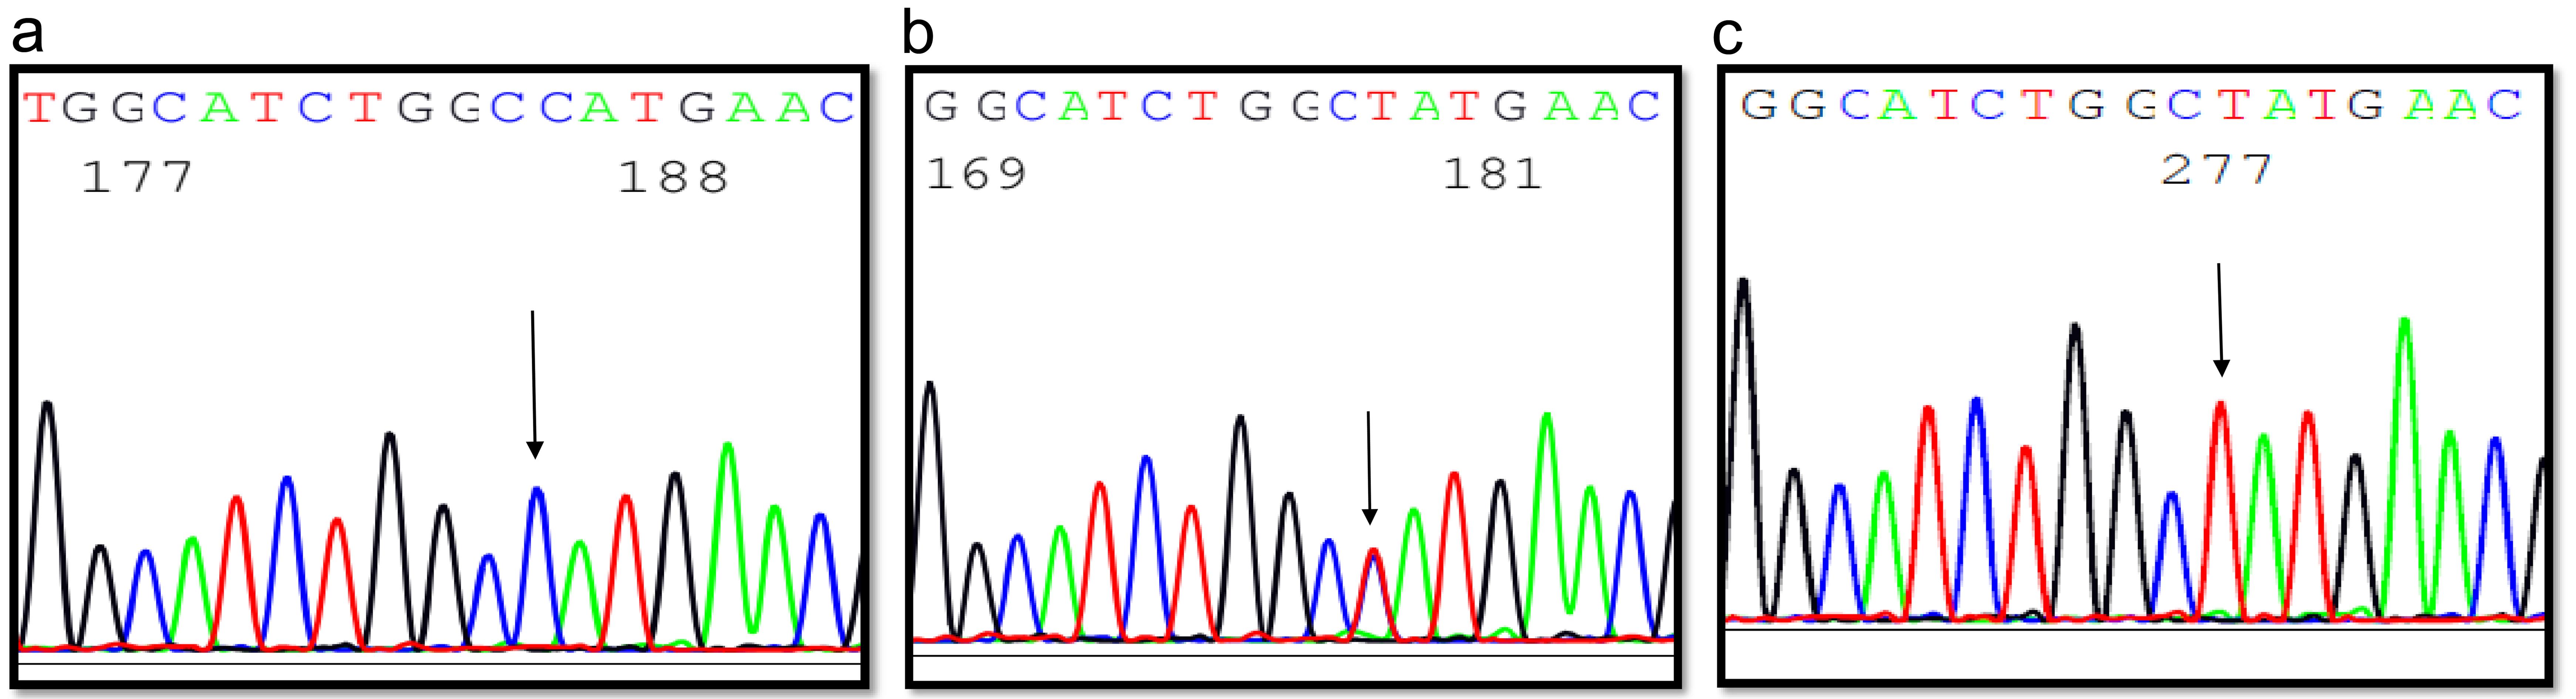 Sequencing results of the <italic>TNFSF15 rs4979462</italic> variant.